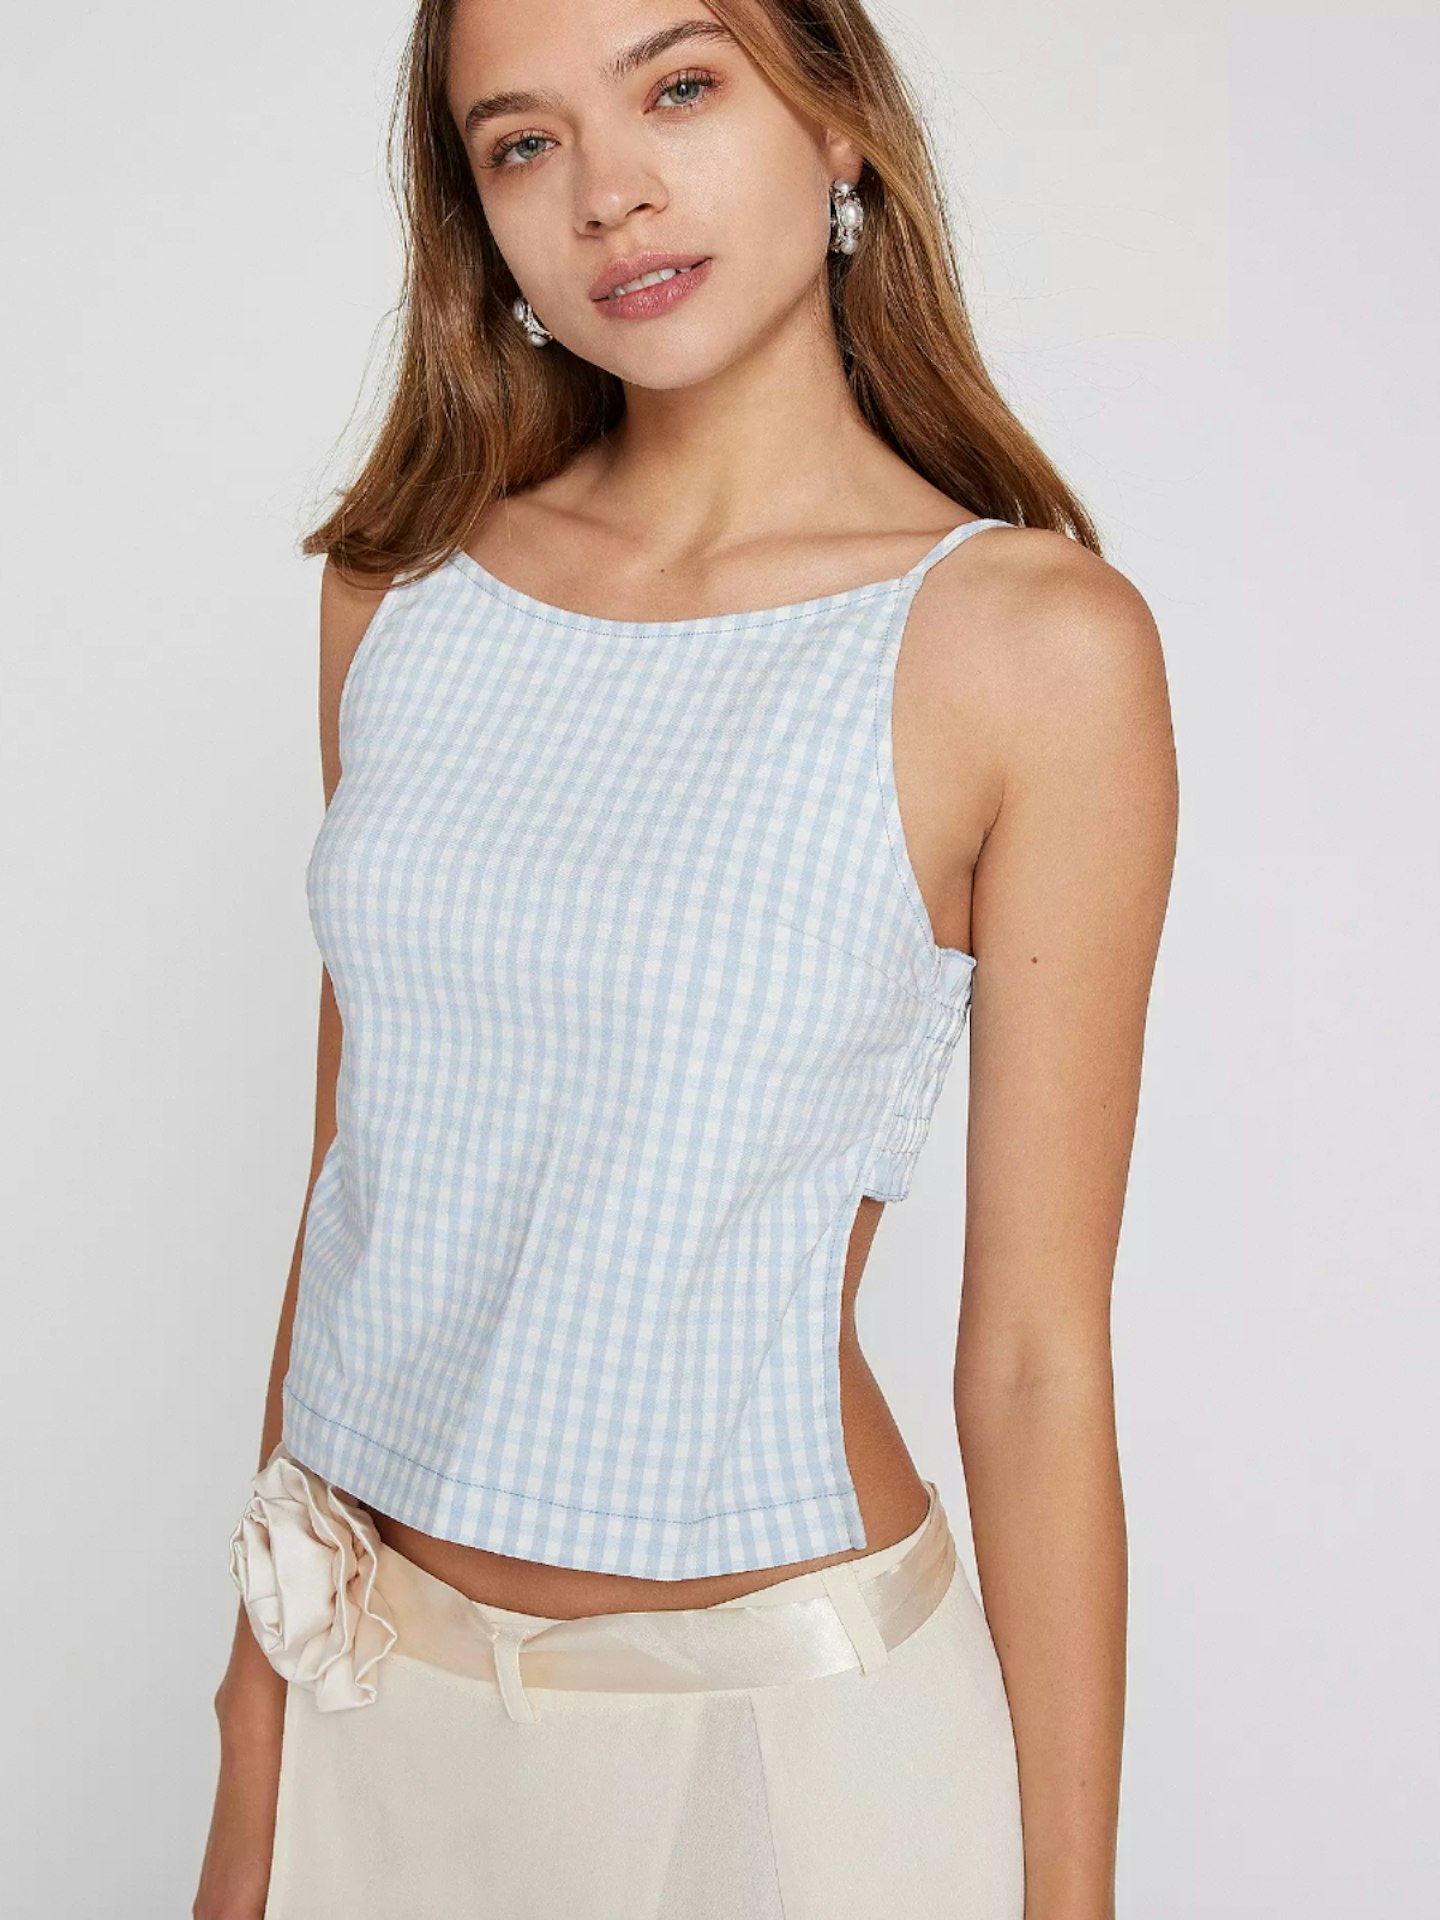 Urban Outfitters, Kimchi Blue Little Lies Gingham Apron Top